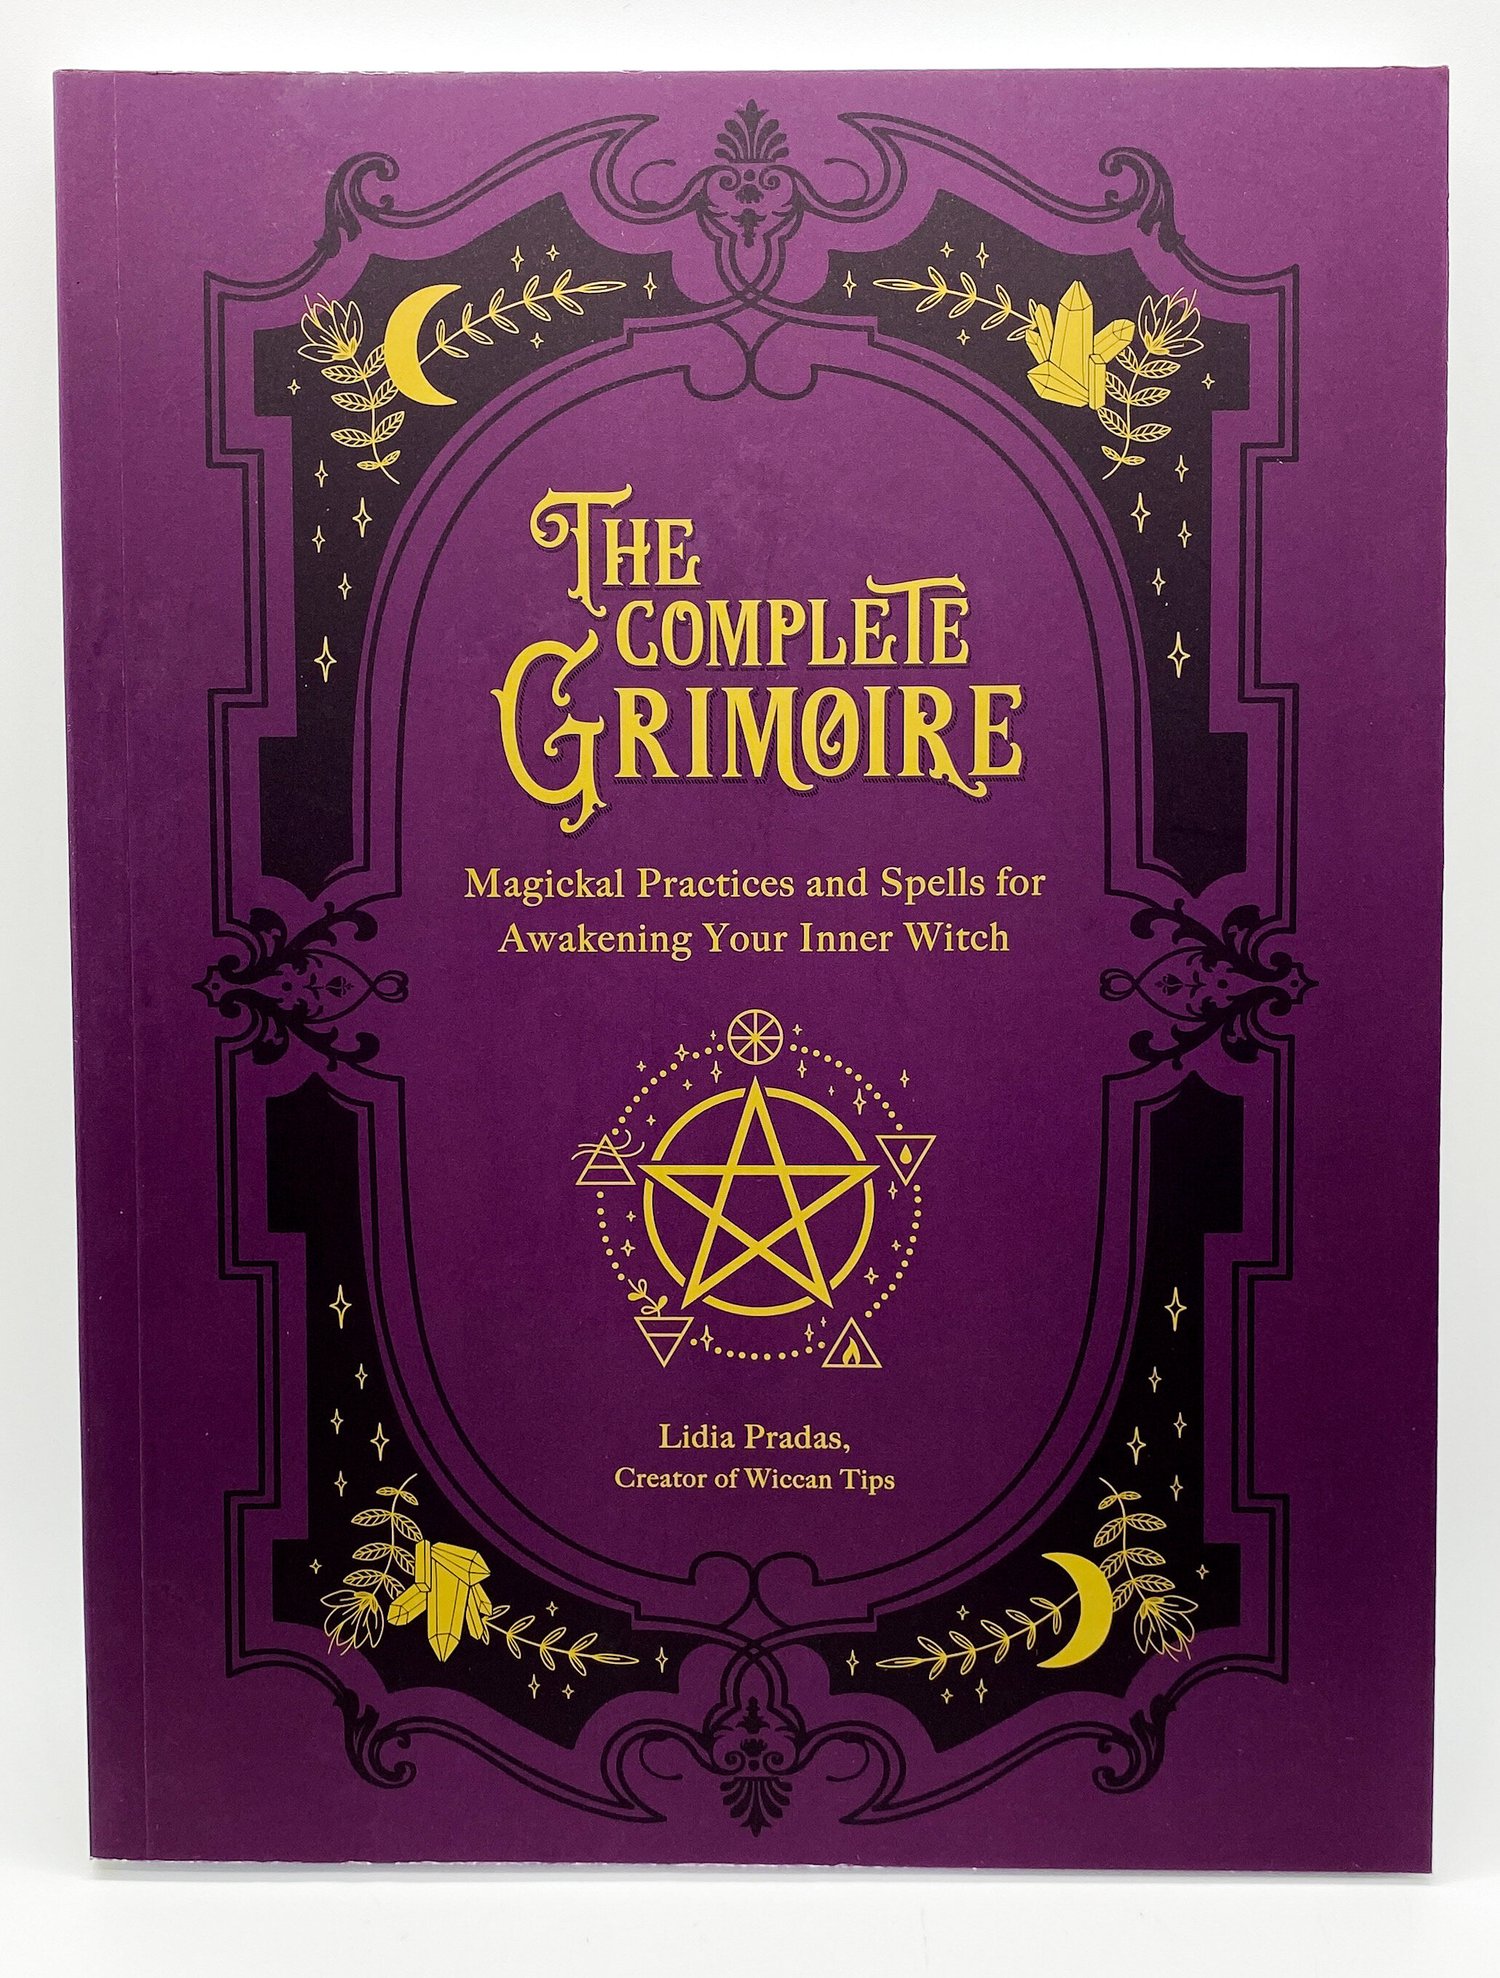 The Complete Grimoire: Magickal Practices and Spells for Awakening